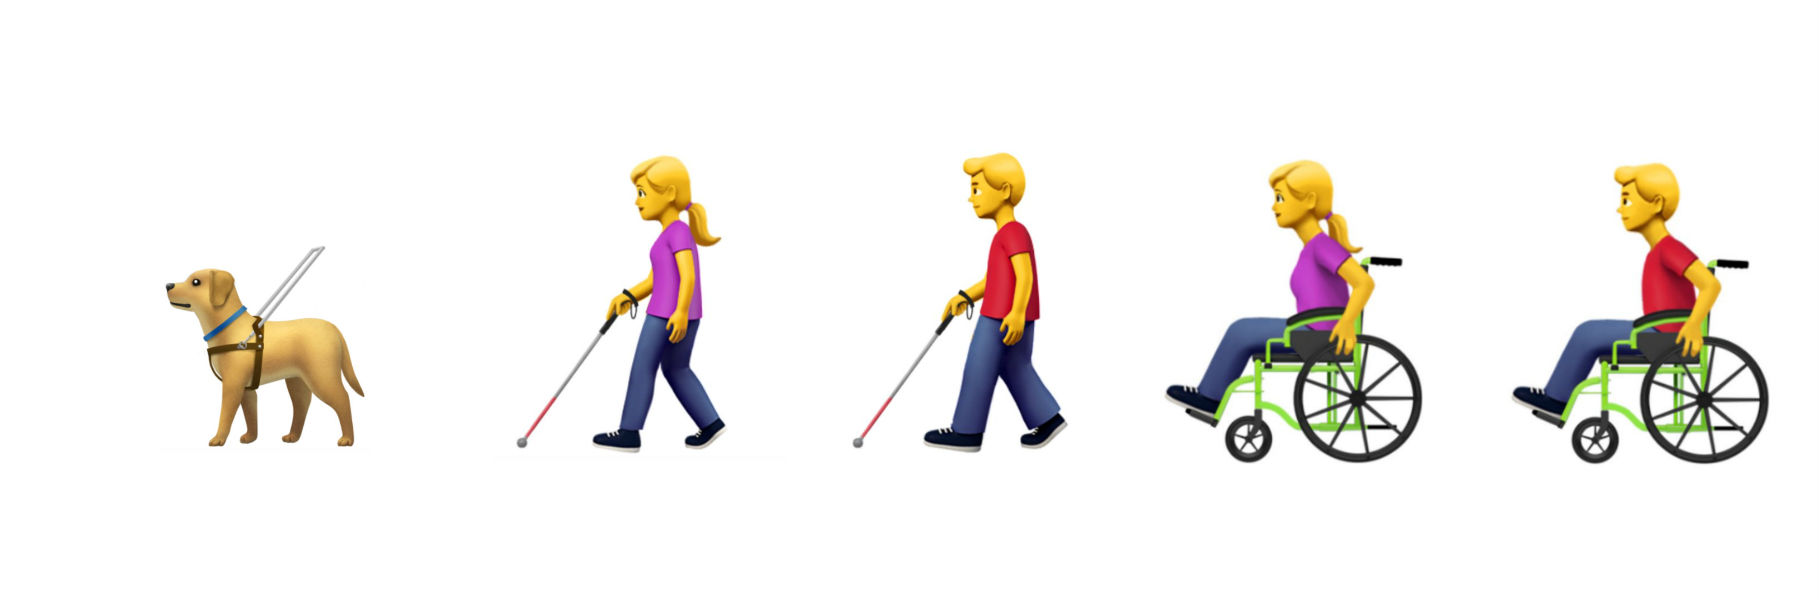 Emojis of a guide dog, a girl and a boy with a visual disability and a girl and a boy in a wheelchair.